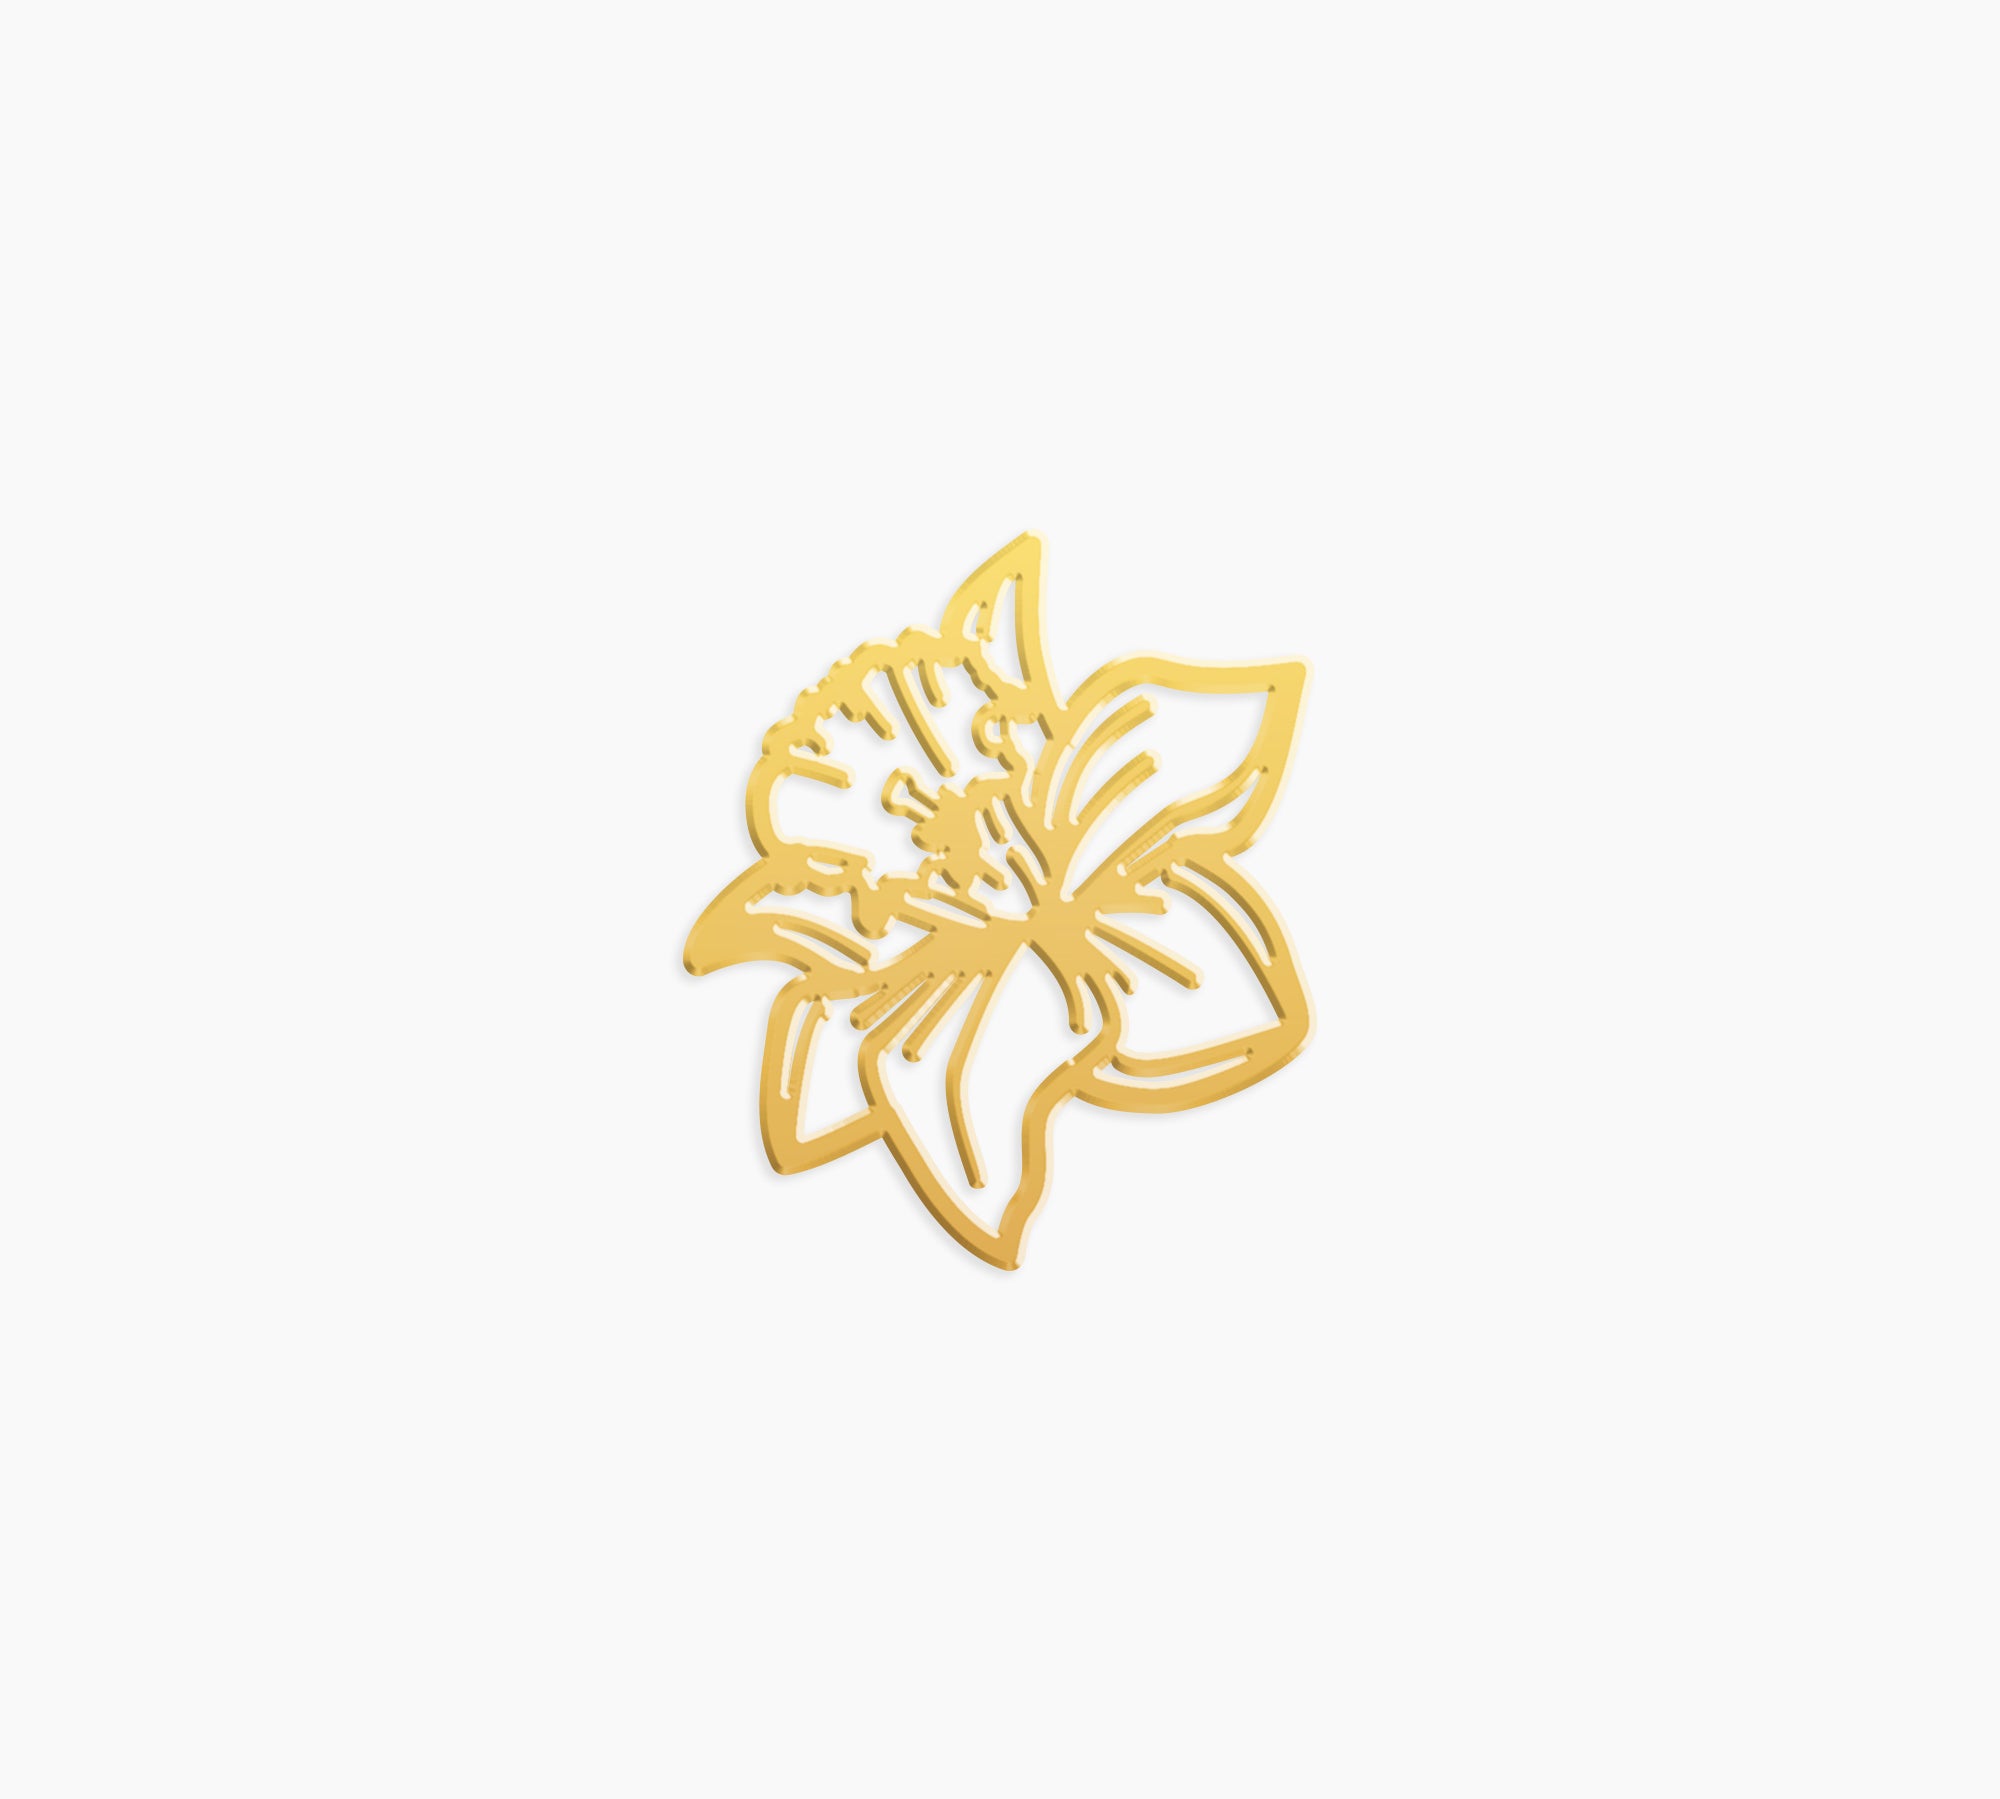 Daffodil Charm - High Quality, Affordable, Whimsical, Hand Drawn Individual Charms for a Custom Locket - March Birthday Gift - Available in Gold and Silver - Made in USA - Brevity Jewelry